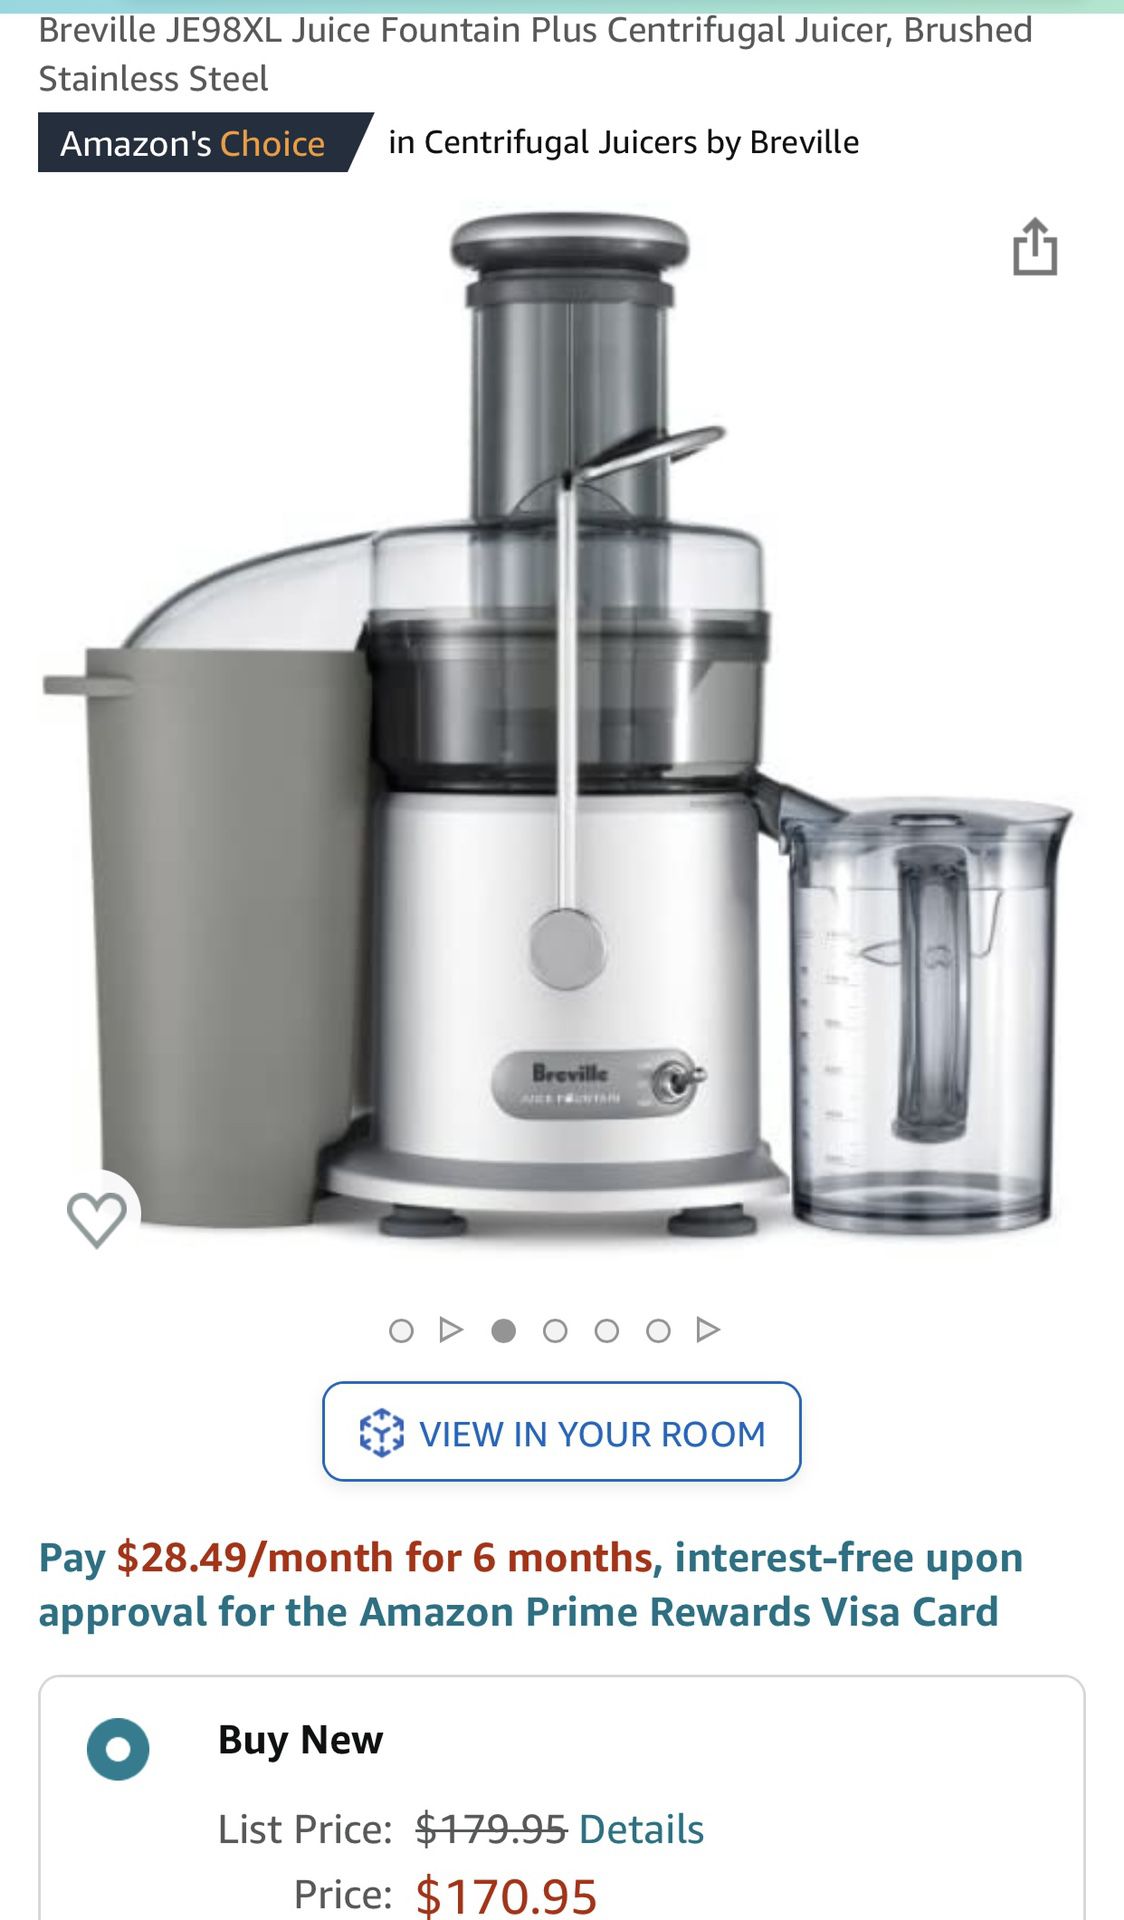 Juicer - Breville JE98XL Juice Fountain Plus Centrifugal Juicer, Brushed Stainless Steel